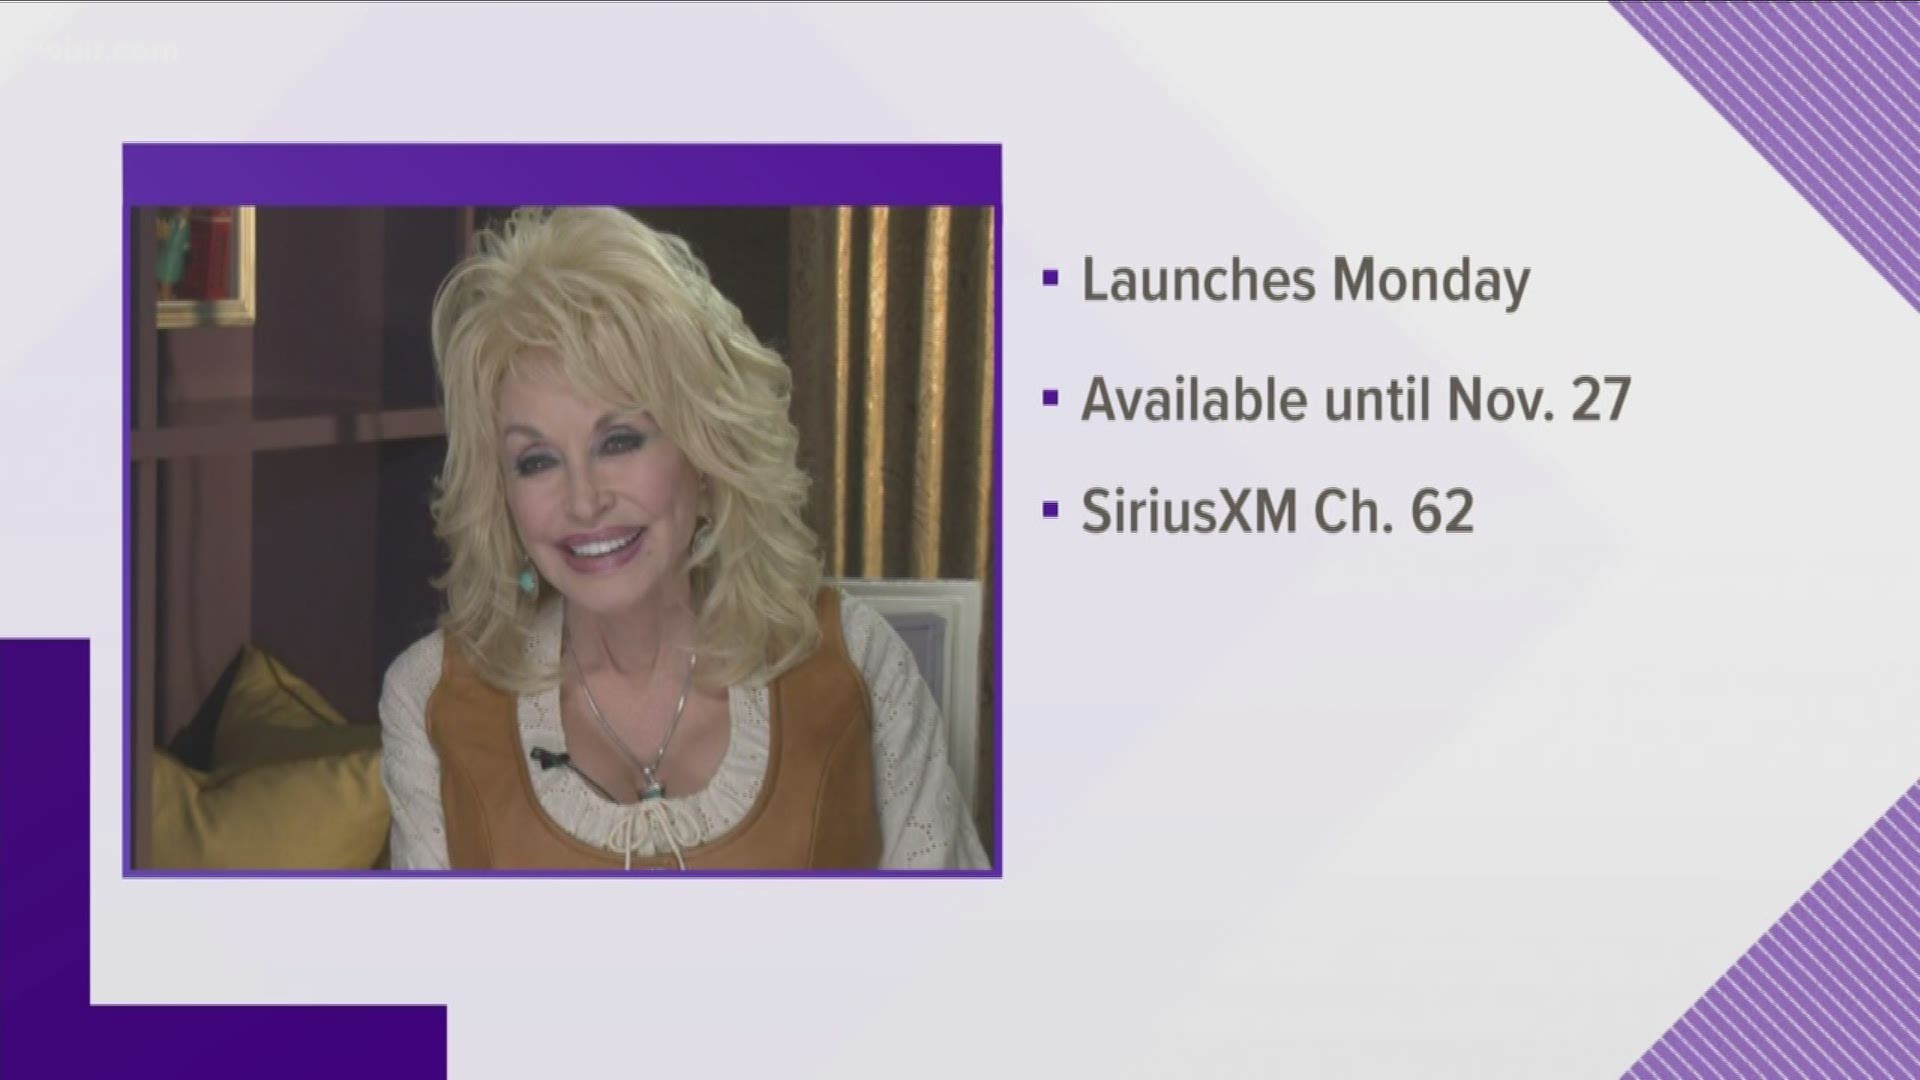 You'll soon be able to listen to Dolly Parton music on a special satellite radio channel called 'Dolly Parton's Heartstrings Radio.'